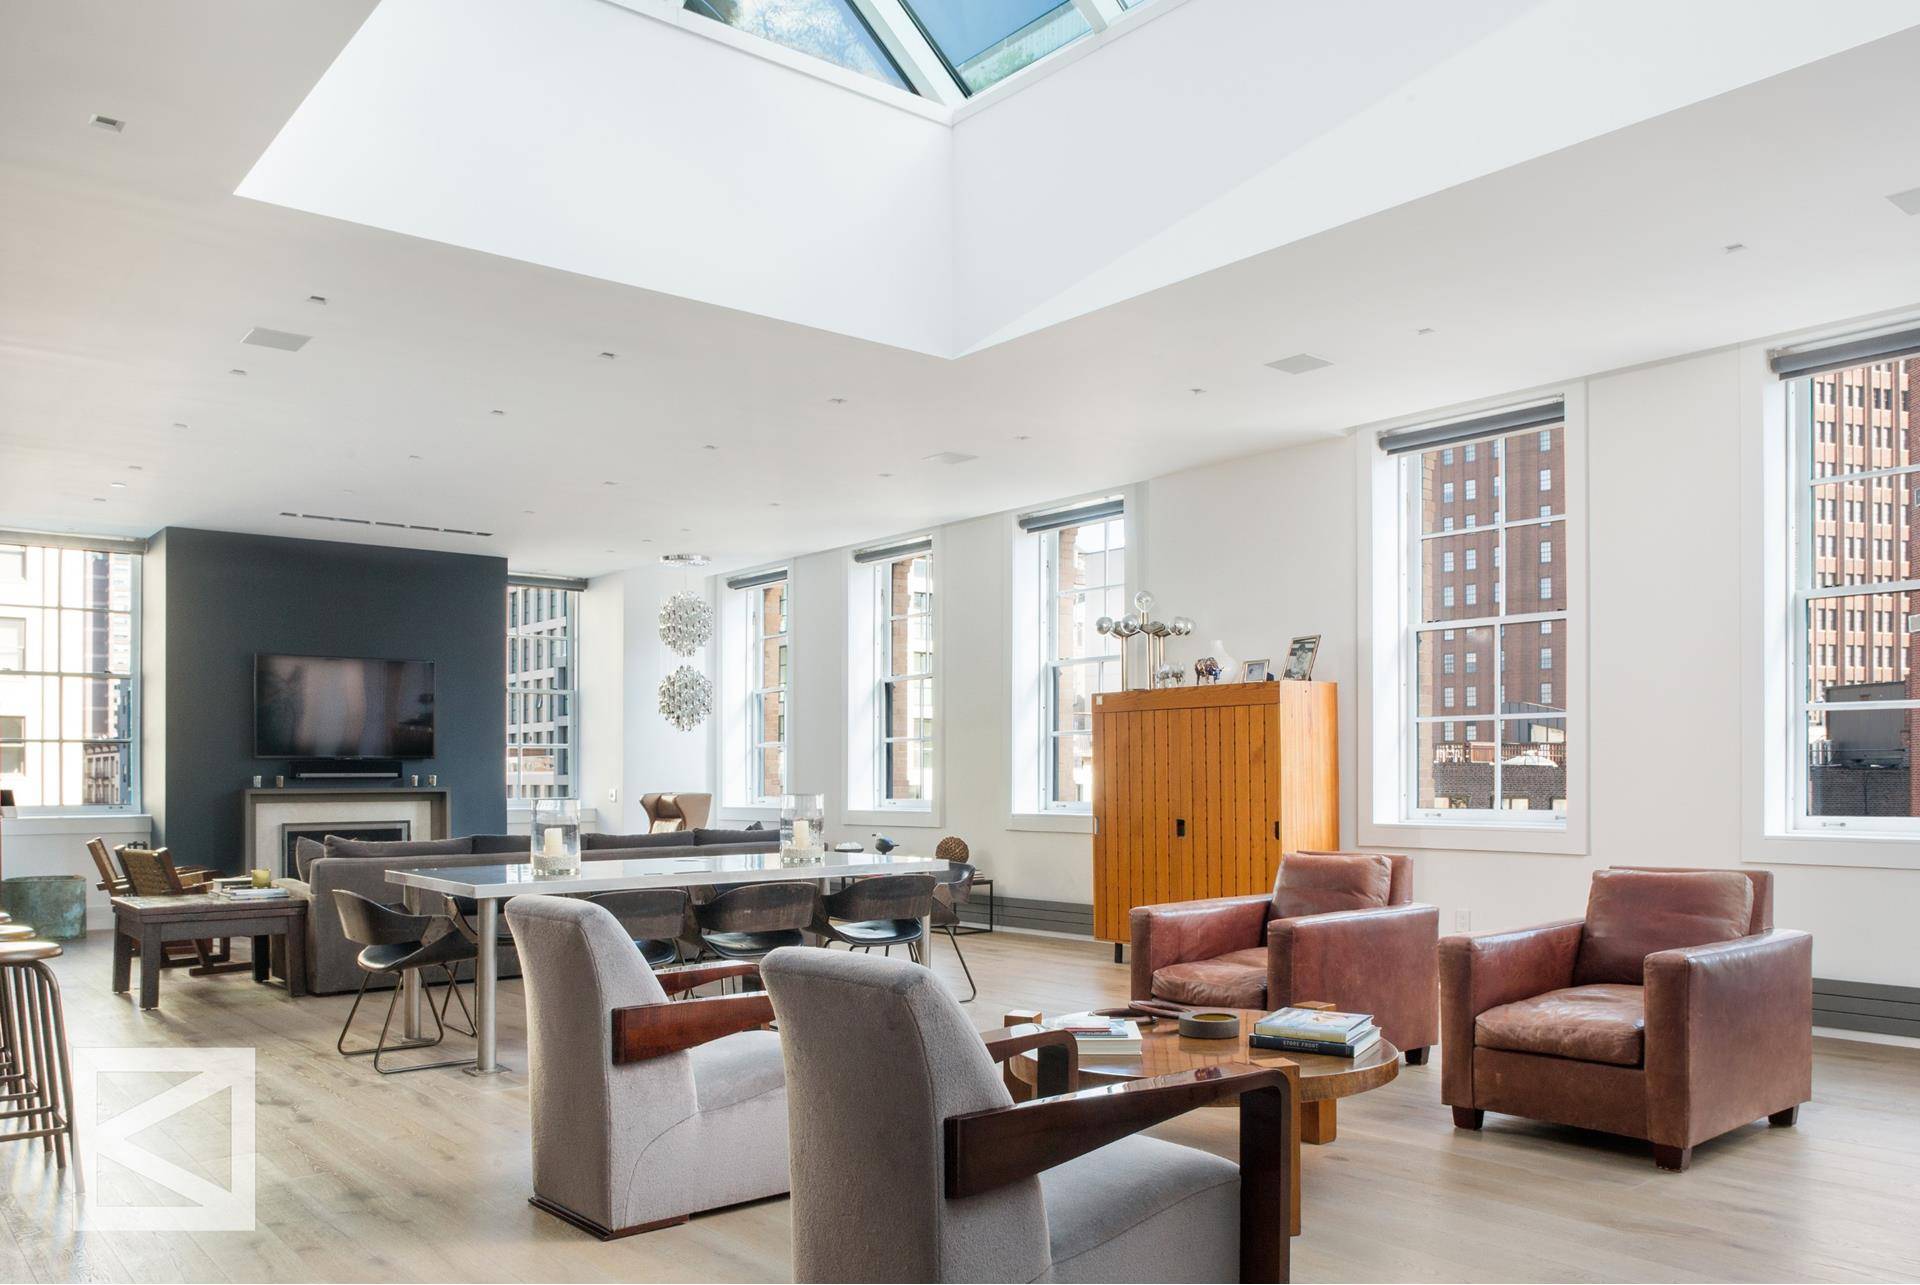 This rare and important pre war loft condominium, built by Albert Wagner in 1887, offers 12 exclusive lofts.